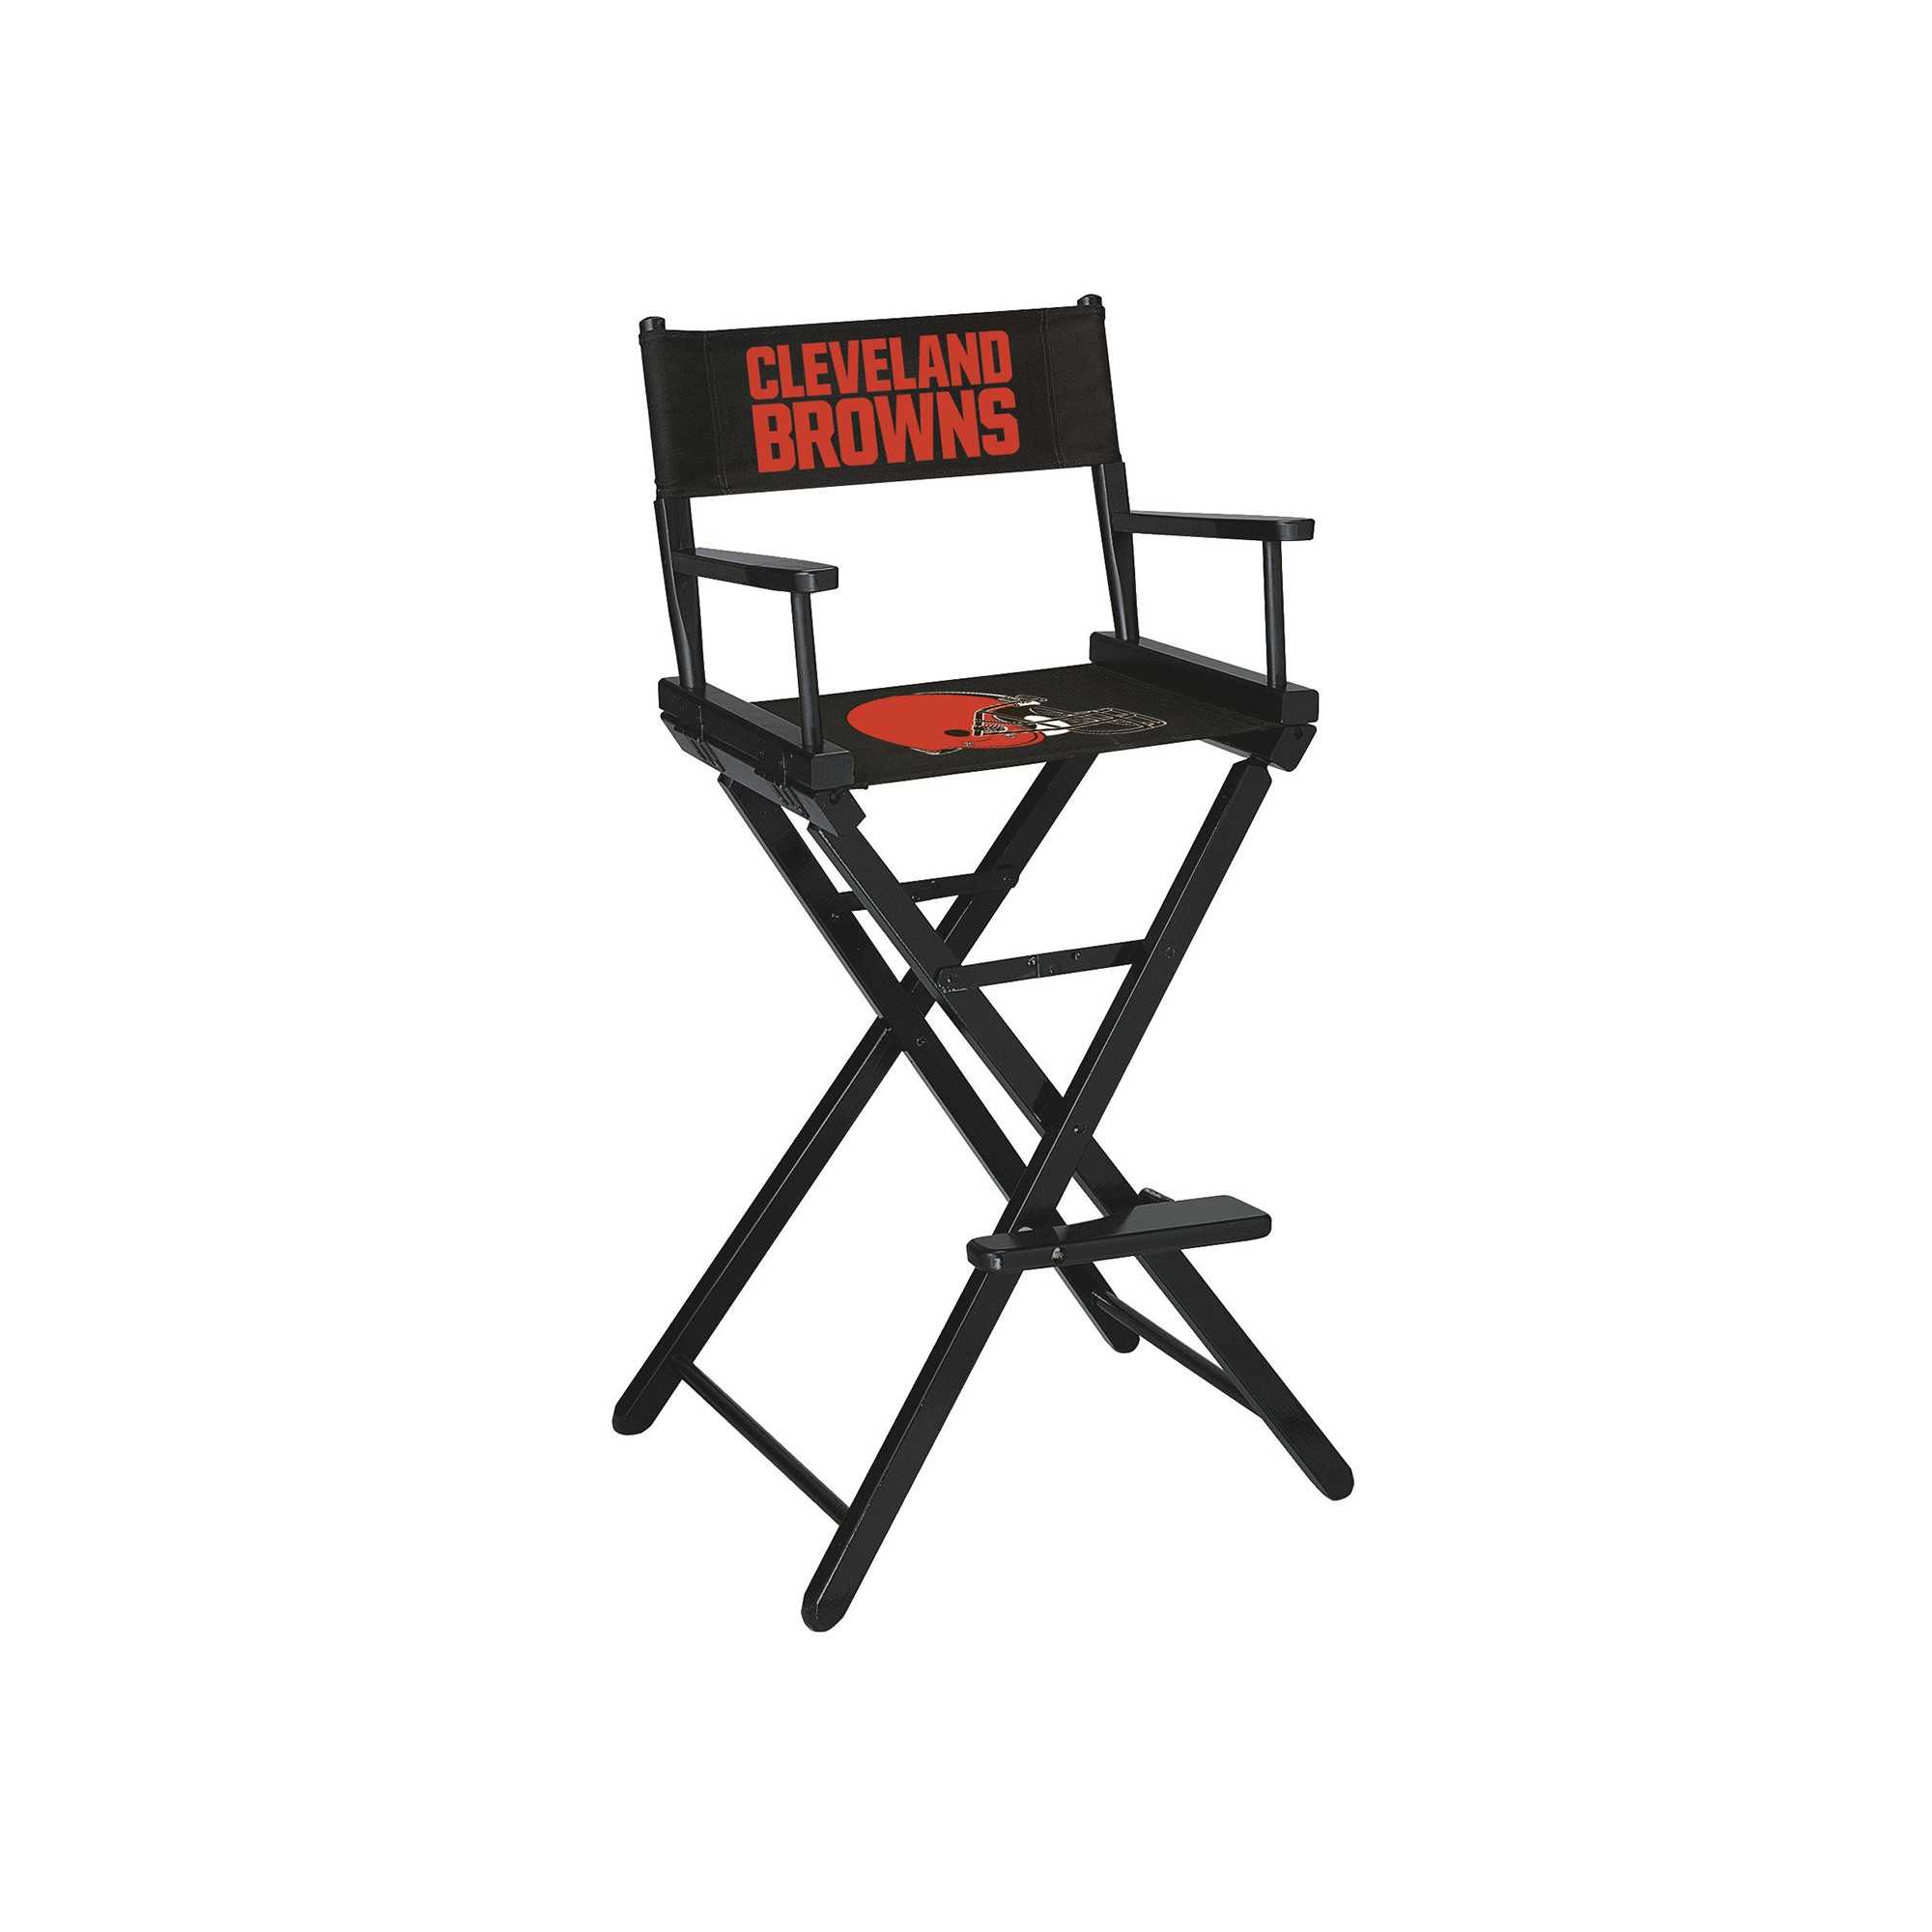 CLEVELAND BROWNS BAR HEIGHT DIRECTORS CHAIR